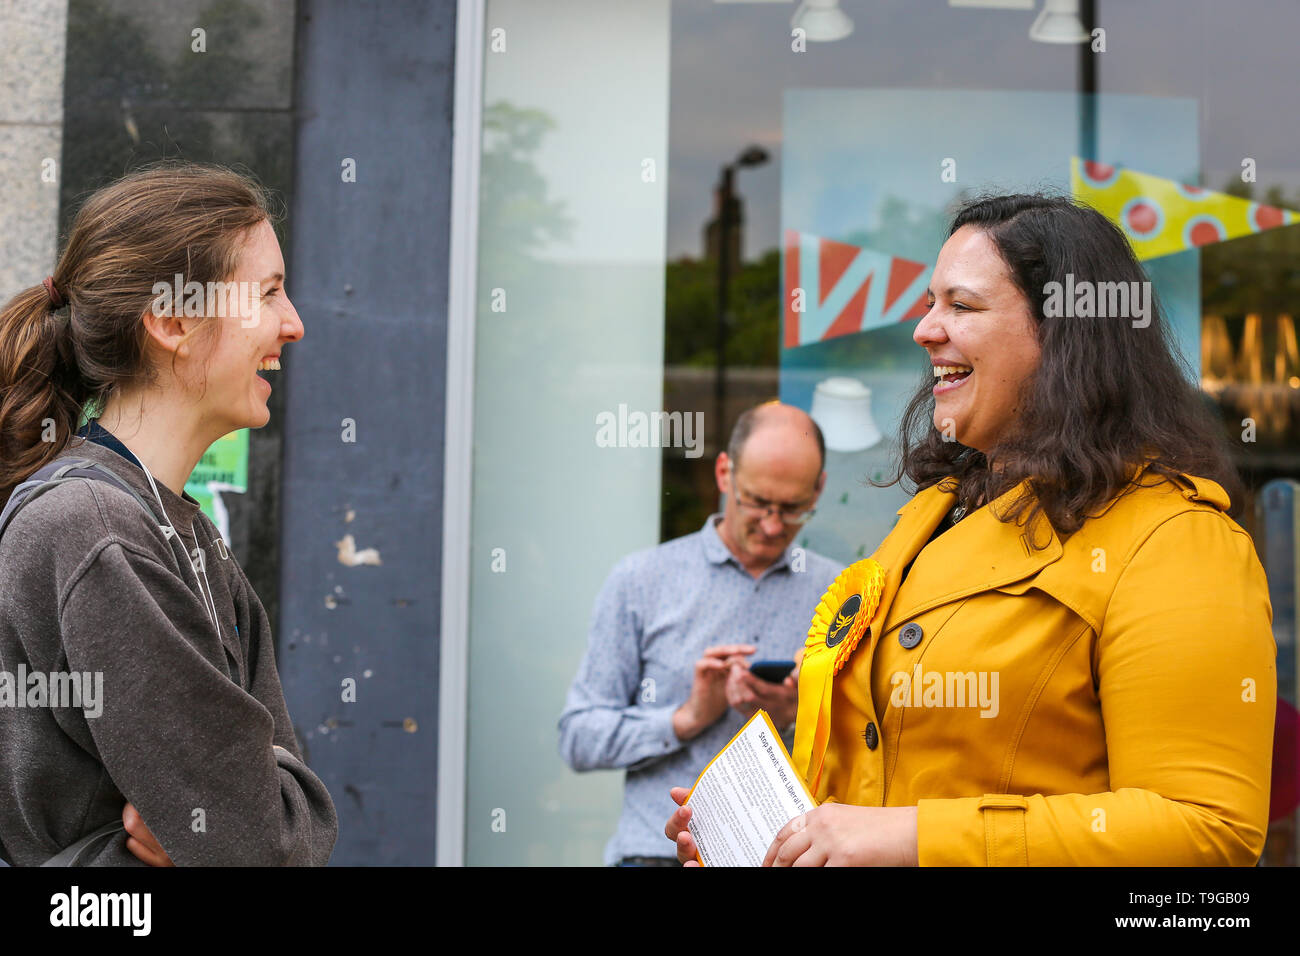 Liberal Democrats MEP candidate for London, Helen Cross is seen speaking with a member of the public during her campaigning in Islington, north London for the forthcoming European Parliament election. Stock Photo